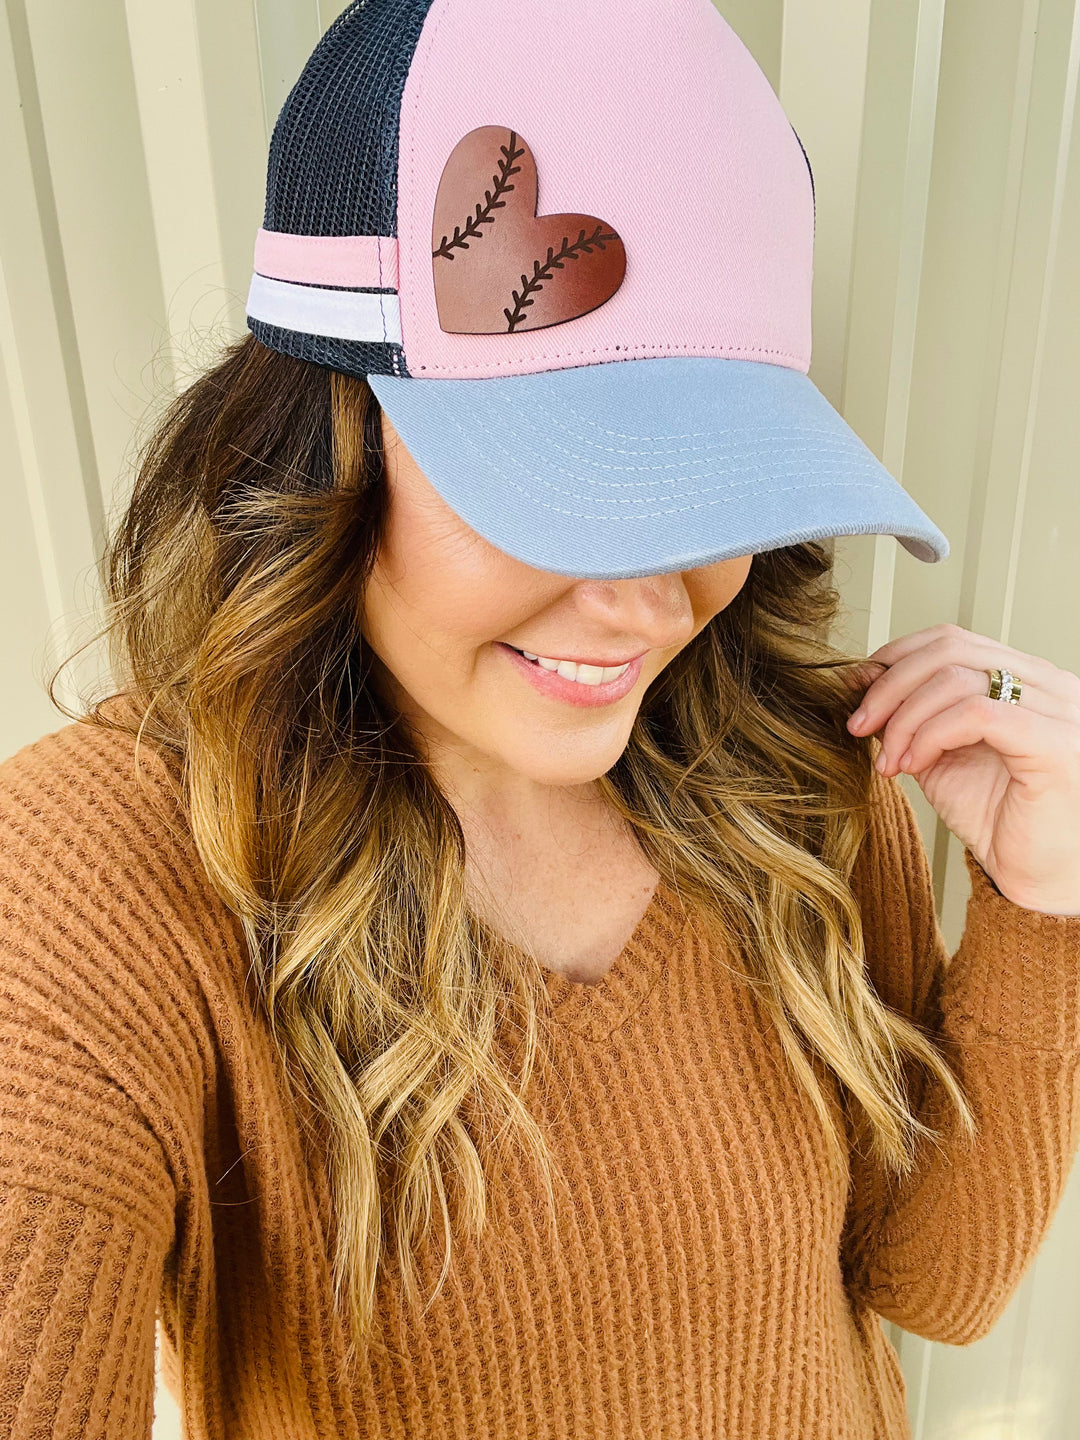 Baseball You Have My Heart, Leather Patch Trucker Hat